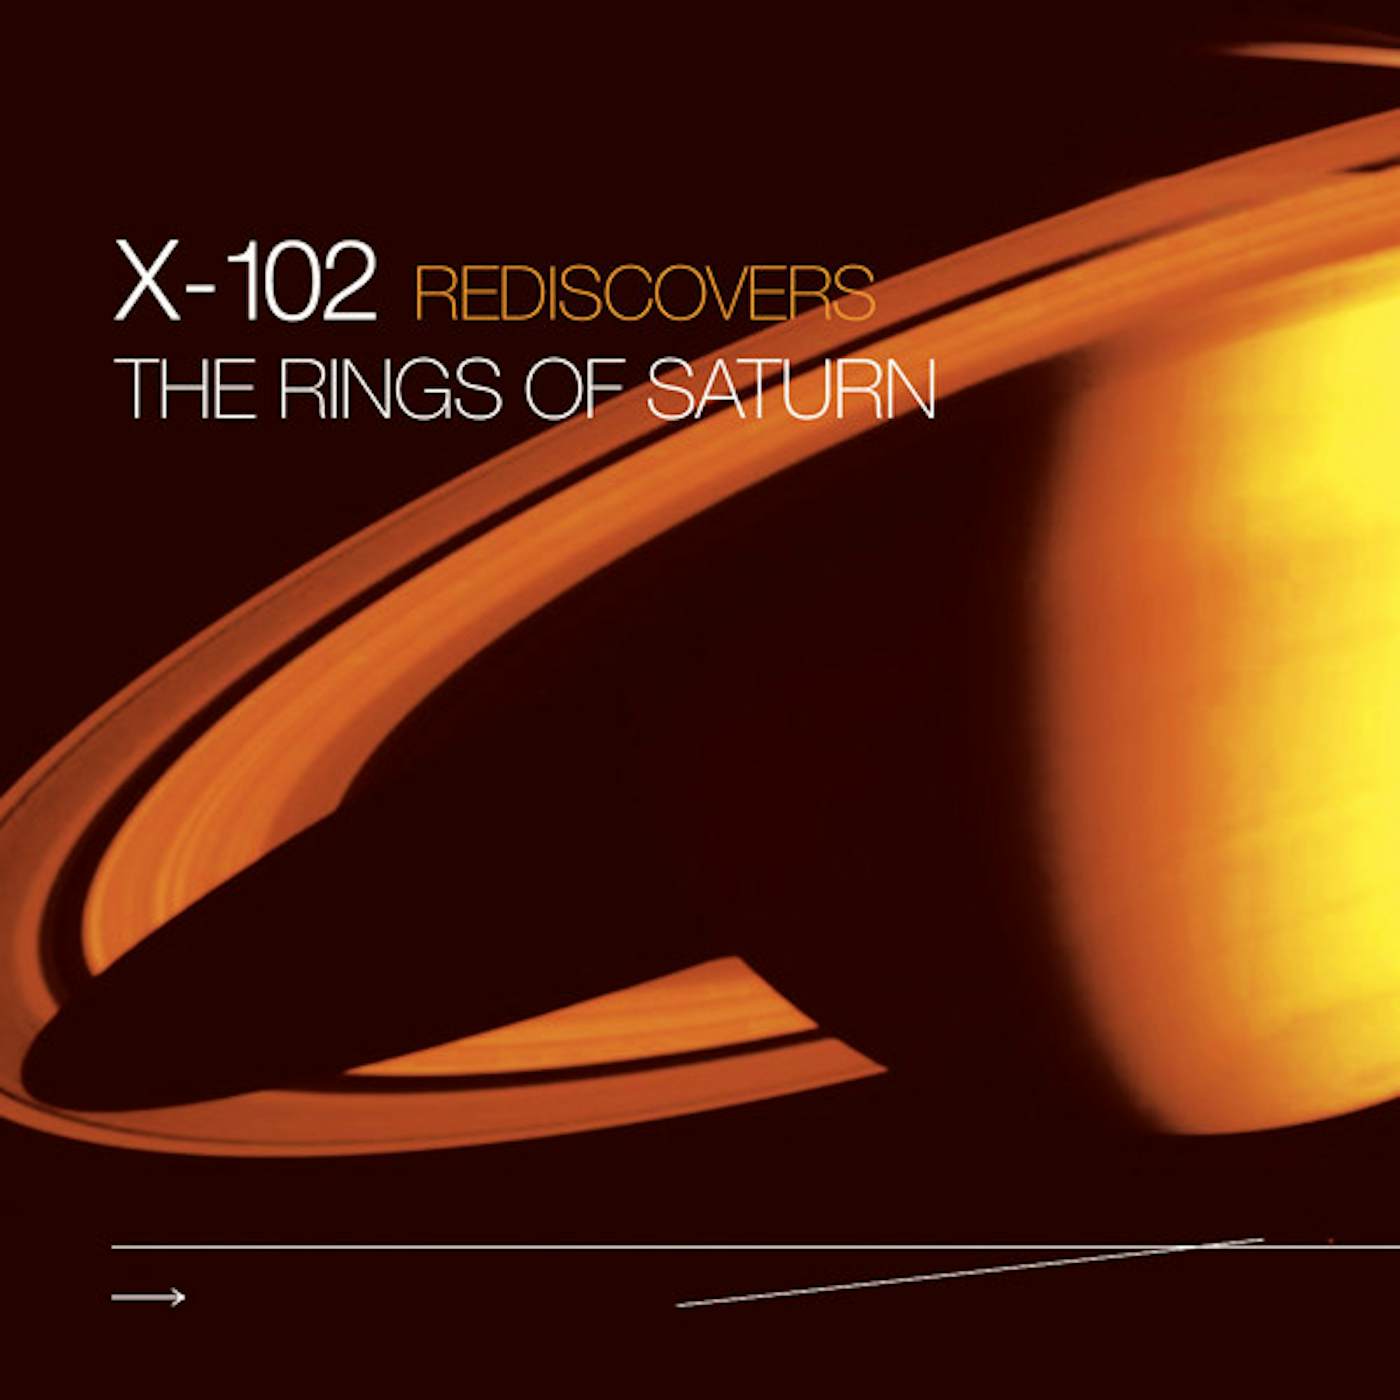 X-102 X102 REDISCOVERS THE RINGS OF SATURN Vinyl Record